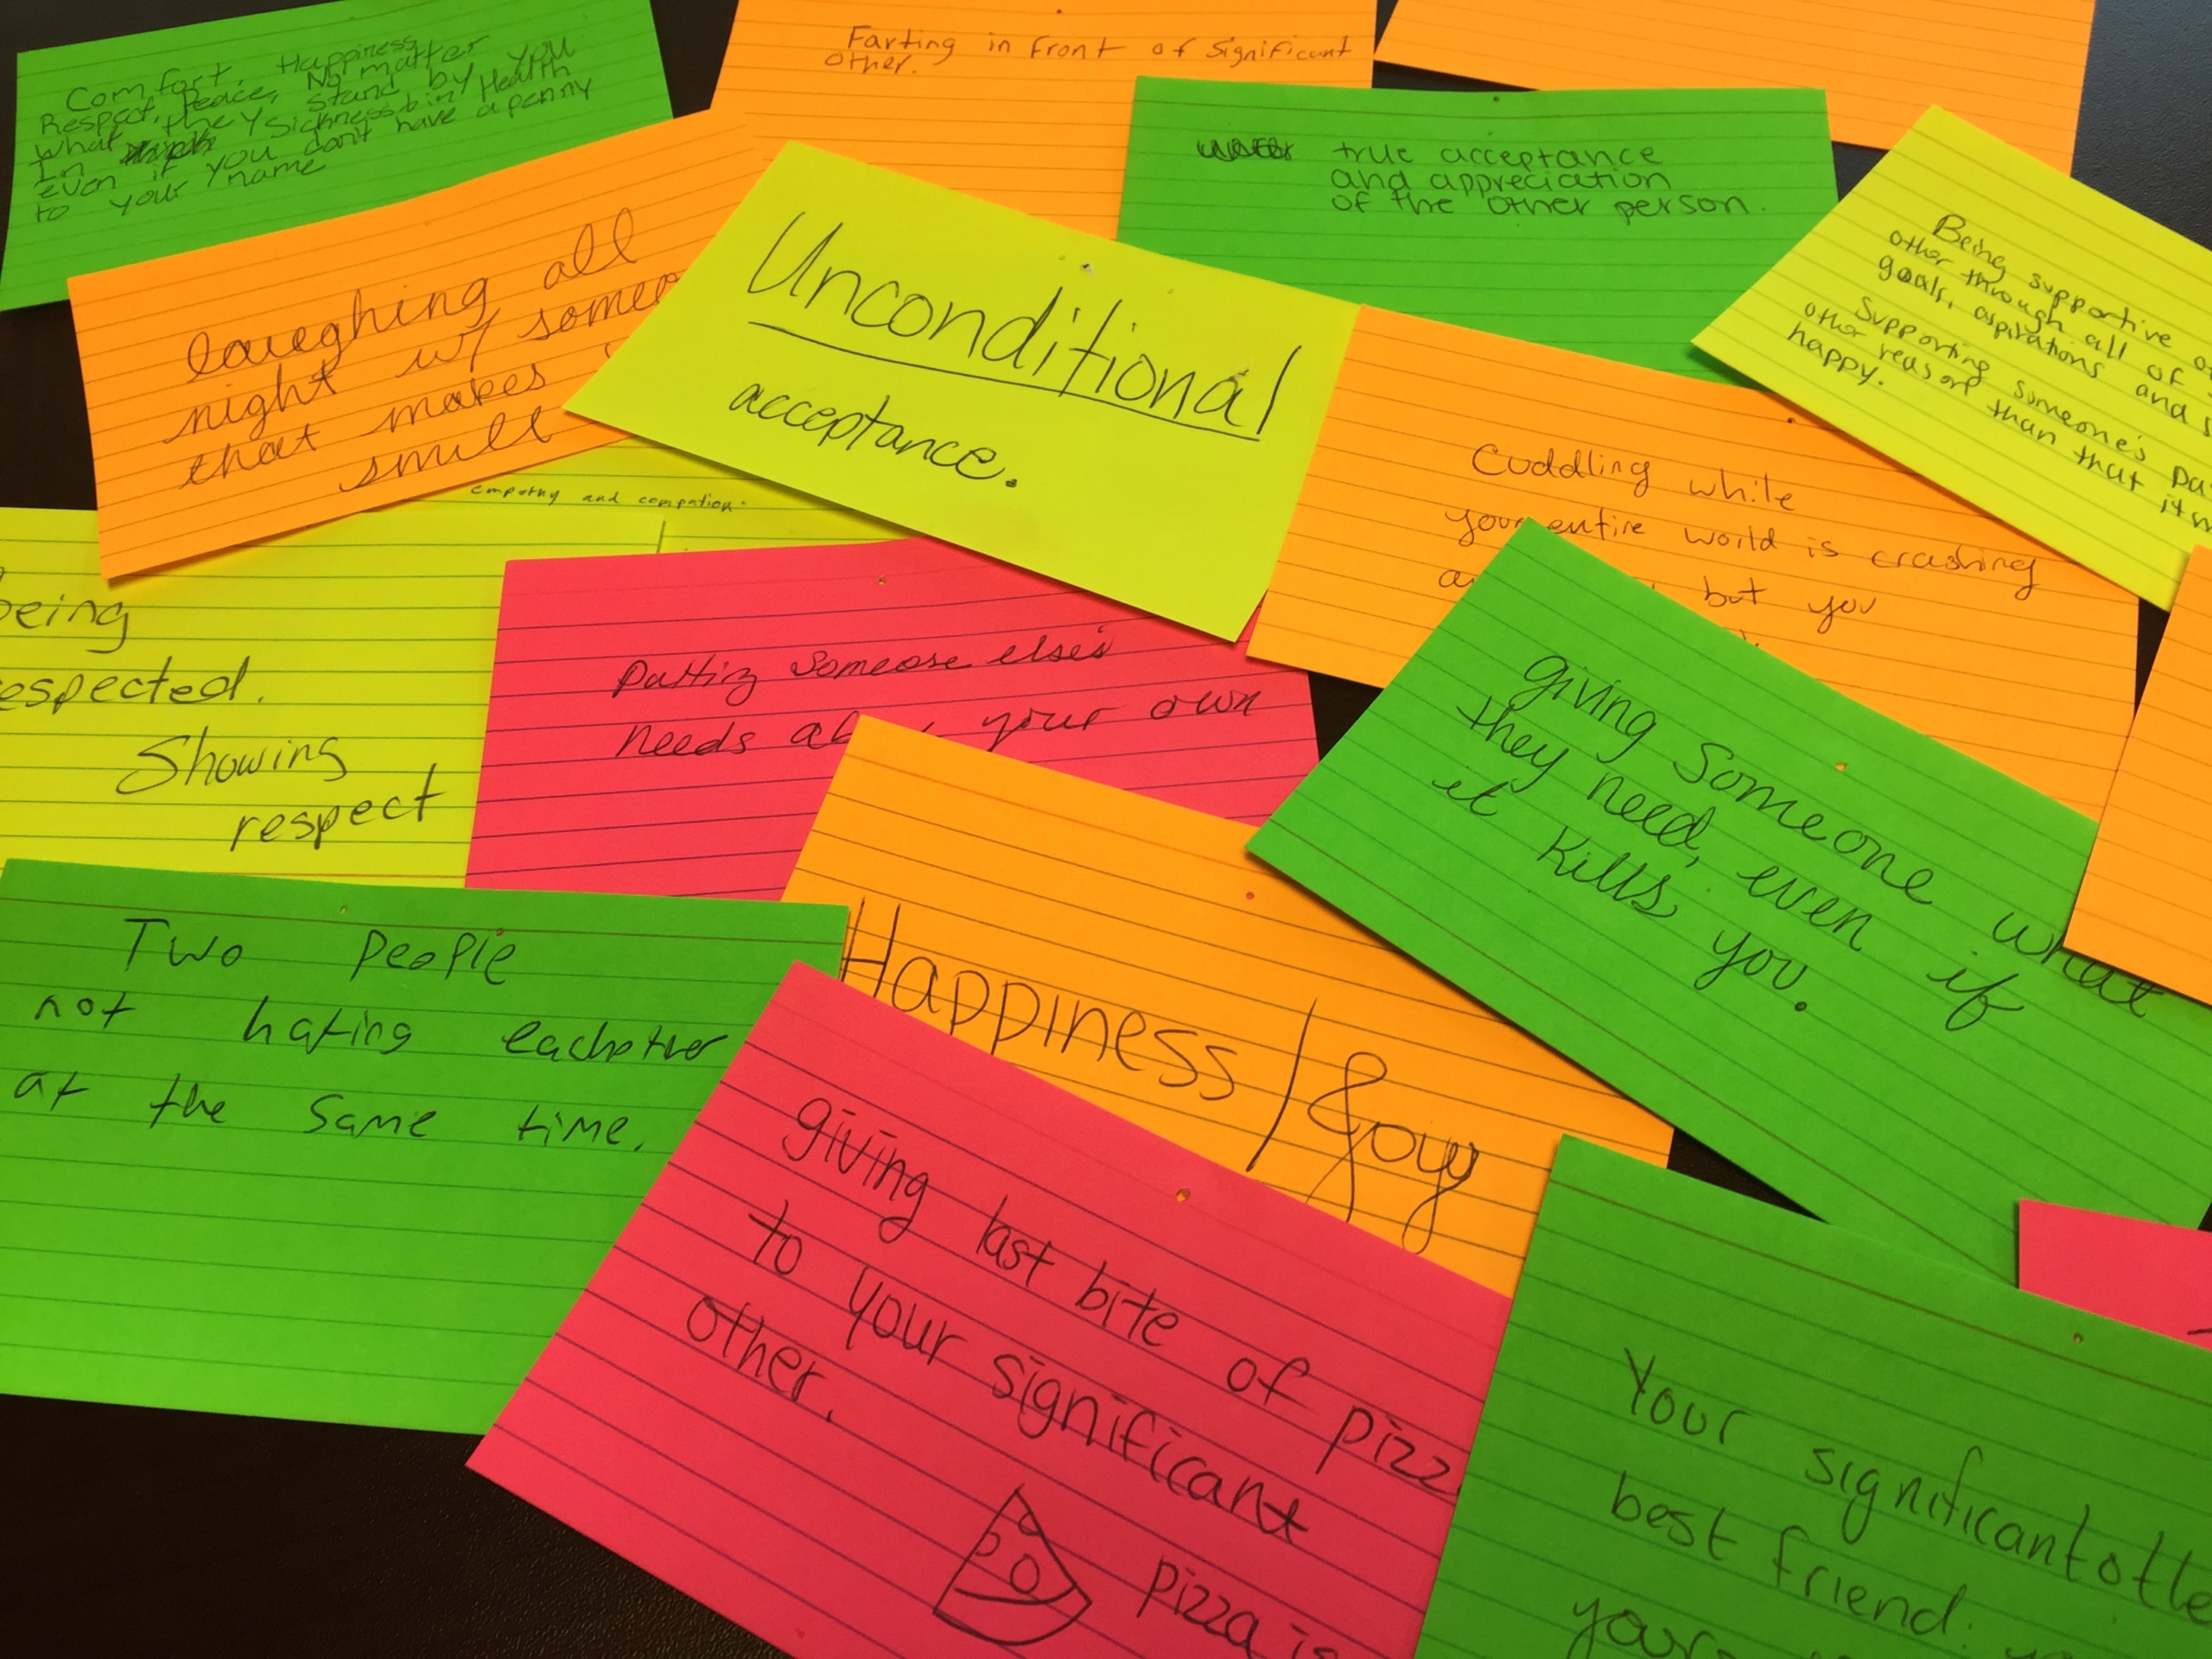 Index cards show the definitions of love submitted by students as part of an interactive display about healthy relationships. 